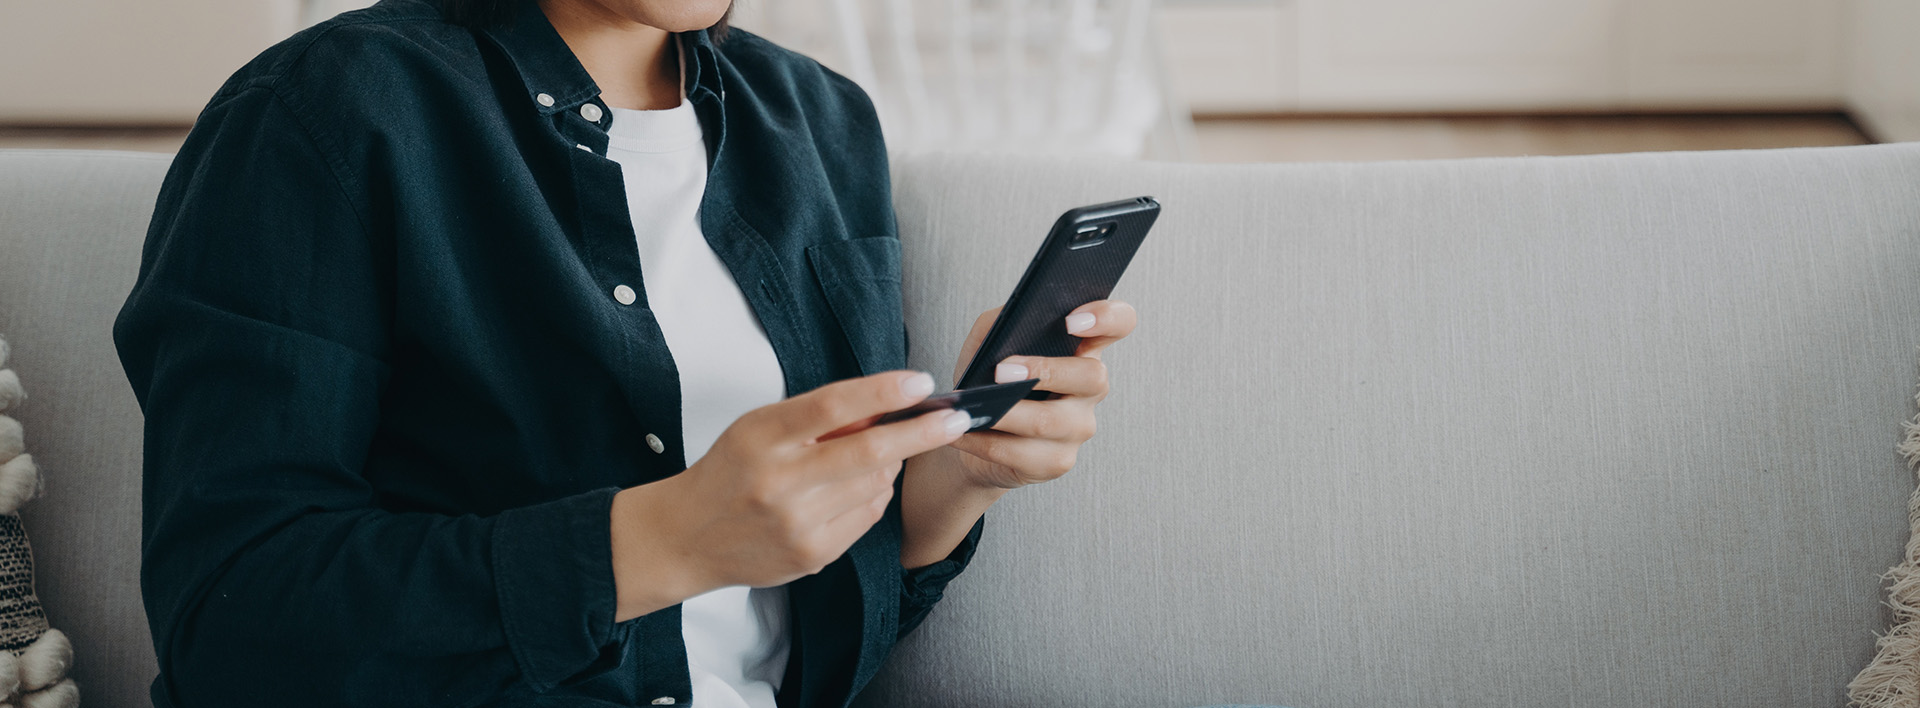 Woman holding bank credit card smartphone makes successful cashless payment sitting on sofa at home